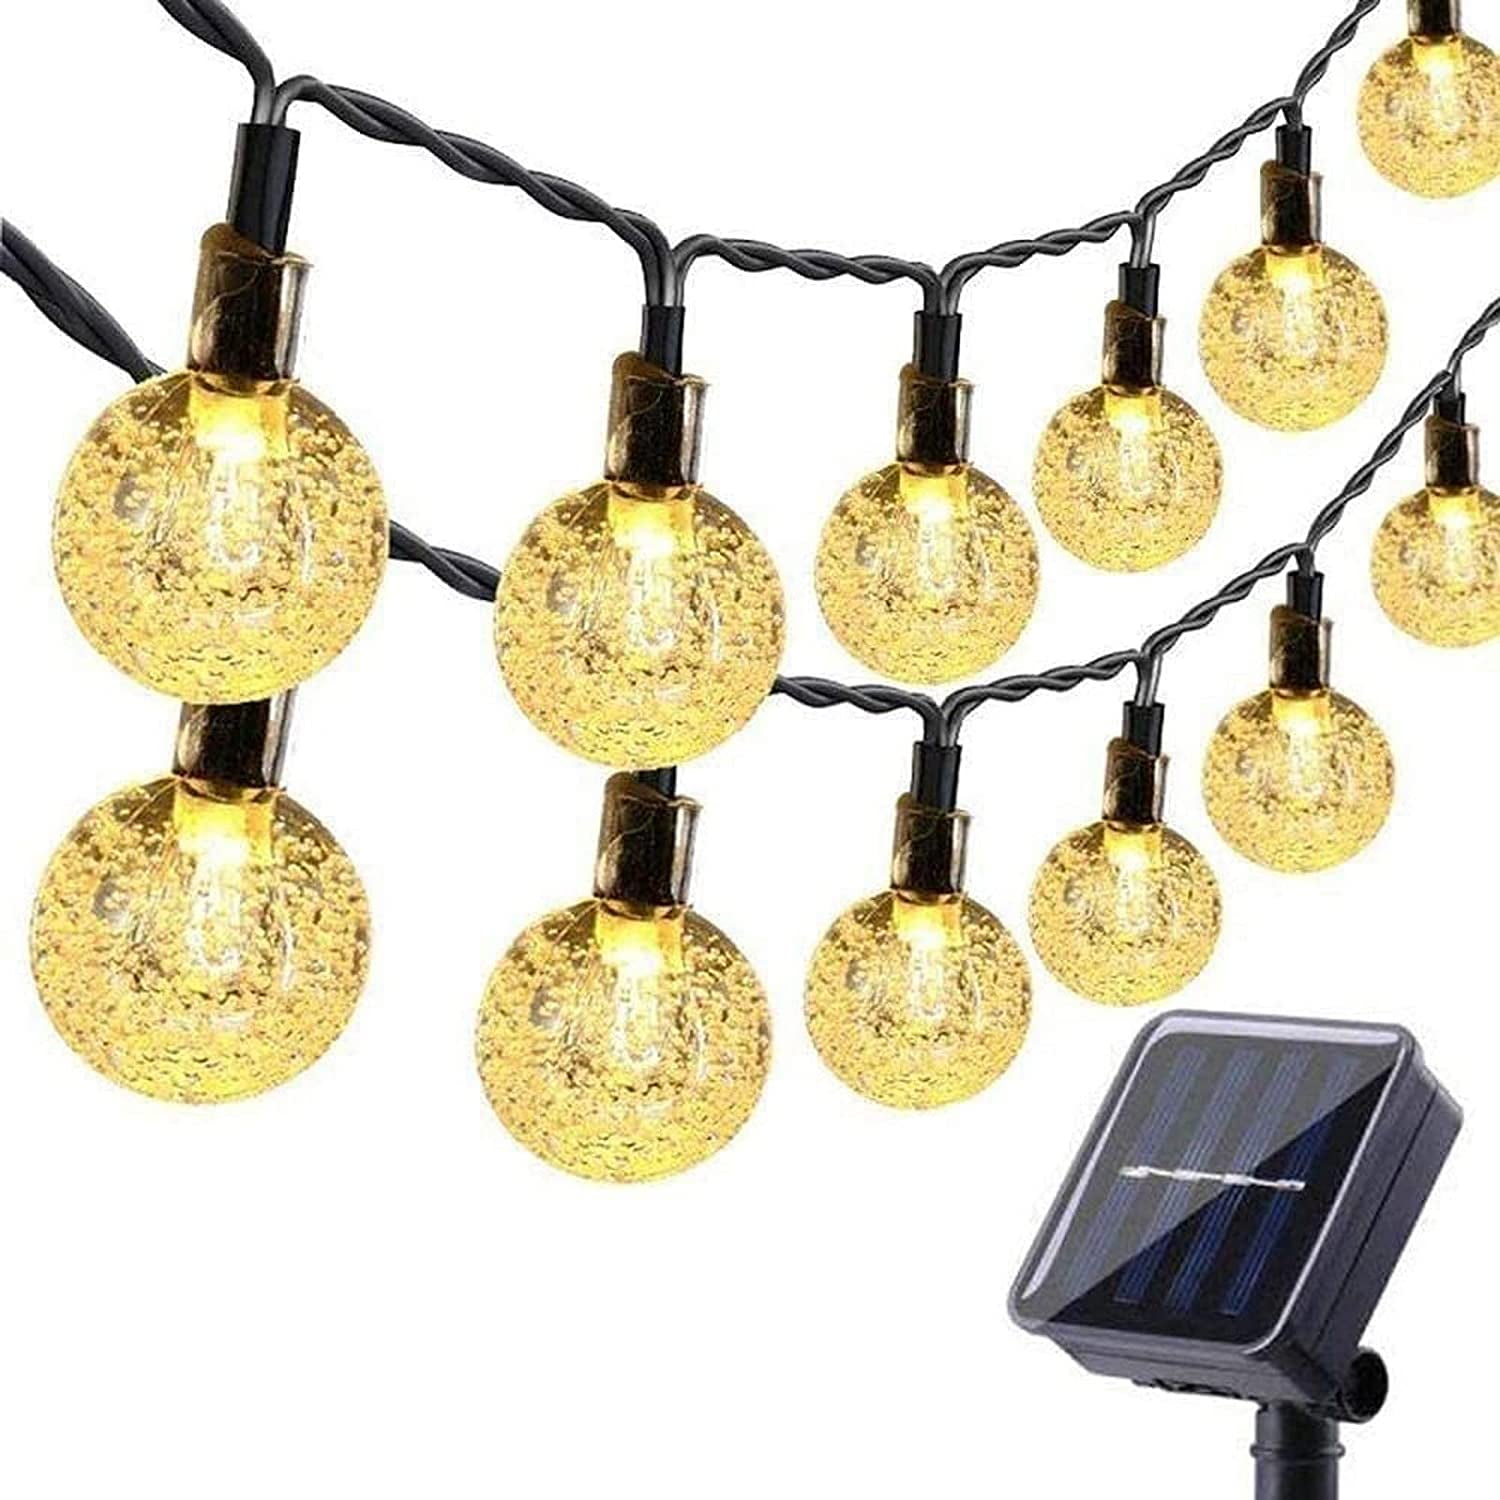 Solar Garden Lights Outdoor Wedding Party Festival Decoration 50 LED 7M/24Ft Solar String Lights Waterproof 8 Modes Indoor/Outdoor Fairy Lights Globe for Garden Yard Patio Clear White Home